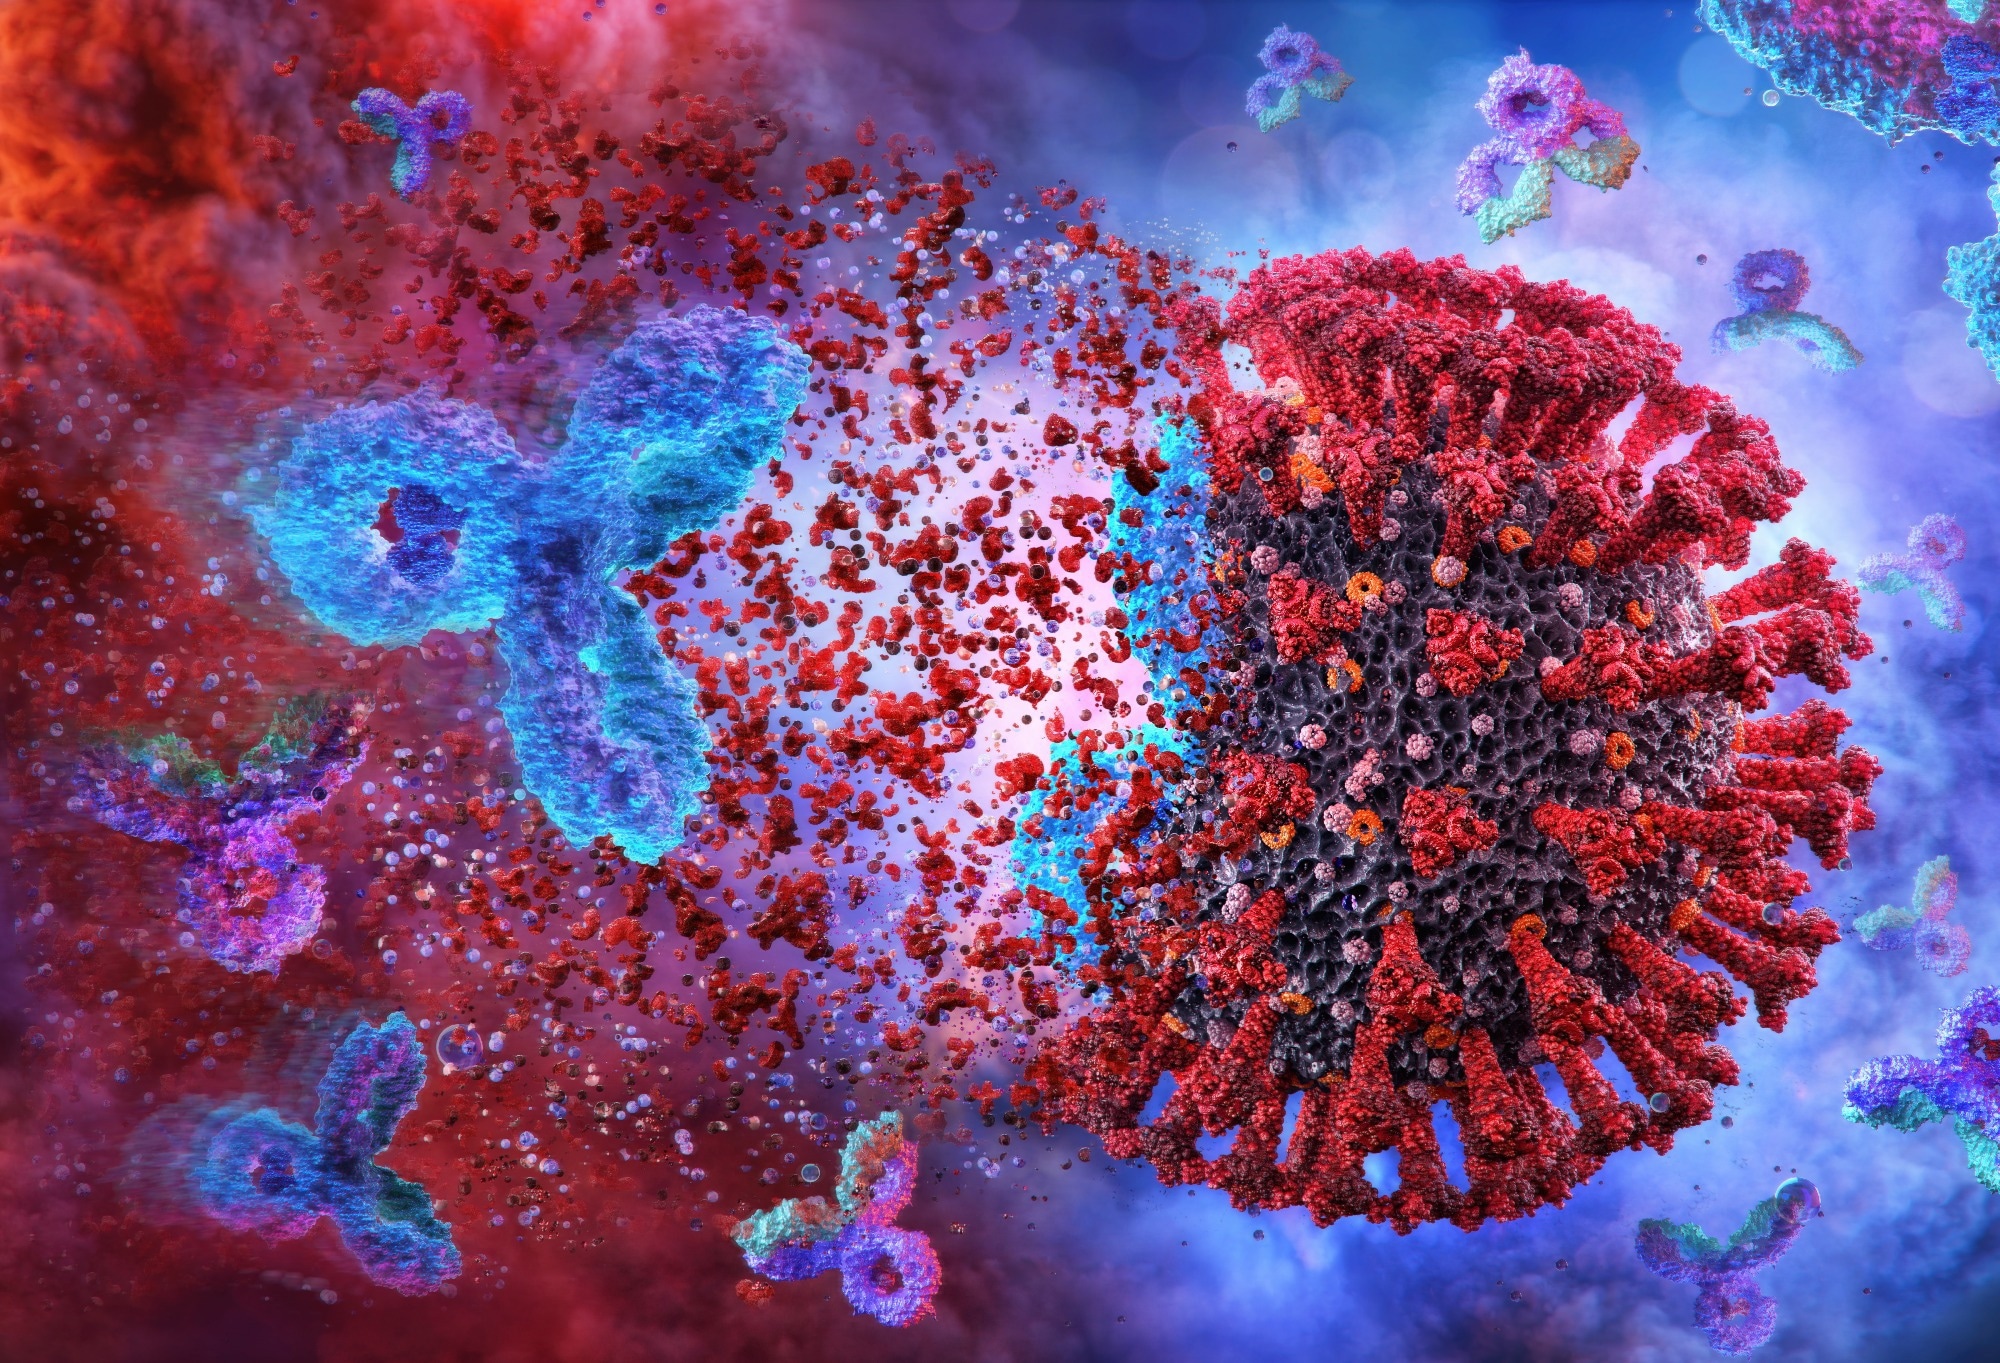 Study: Rapid engineering of SARS-CoV-2 therapeutic antibodies to increase breadth of neutralization including XBB.1.5 and BQ.1.1. Image Credit: Corona Borealis Studio/Shutterstock